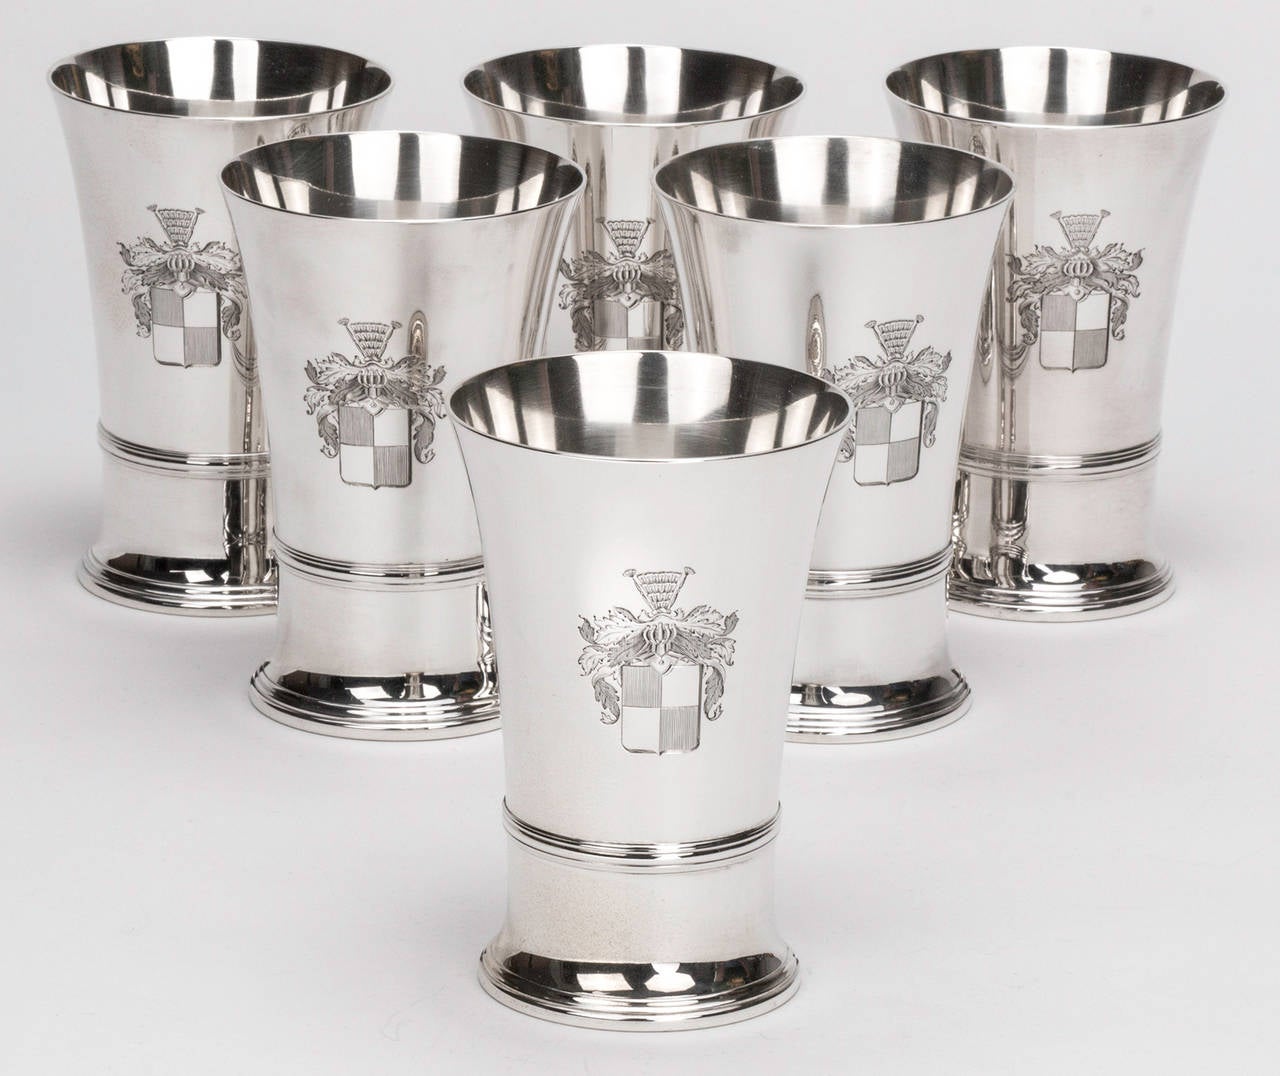 Magnificent set of six Tiffany sterling silver tumblers. Ring trim. Engraved crest on the side. 18998 Tiffany & Co makers 925 mark underneath. Great size holding up to 12oz. Per cup. In excellent condition.